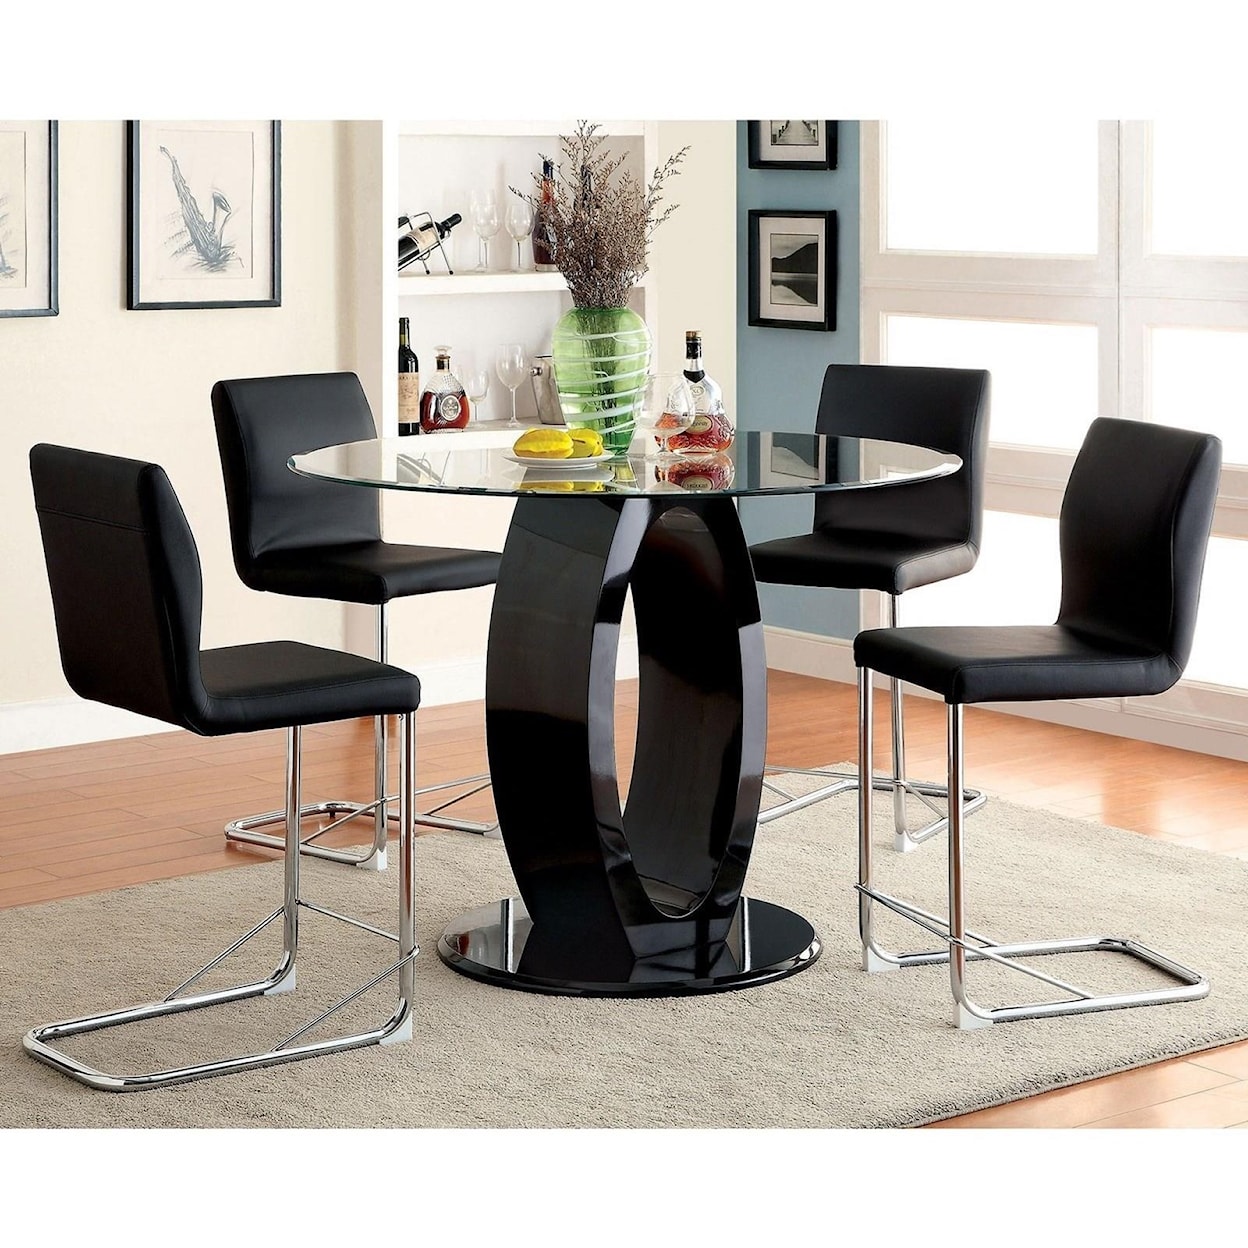 FUSA Lodia II Table and 4 Side Chairs